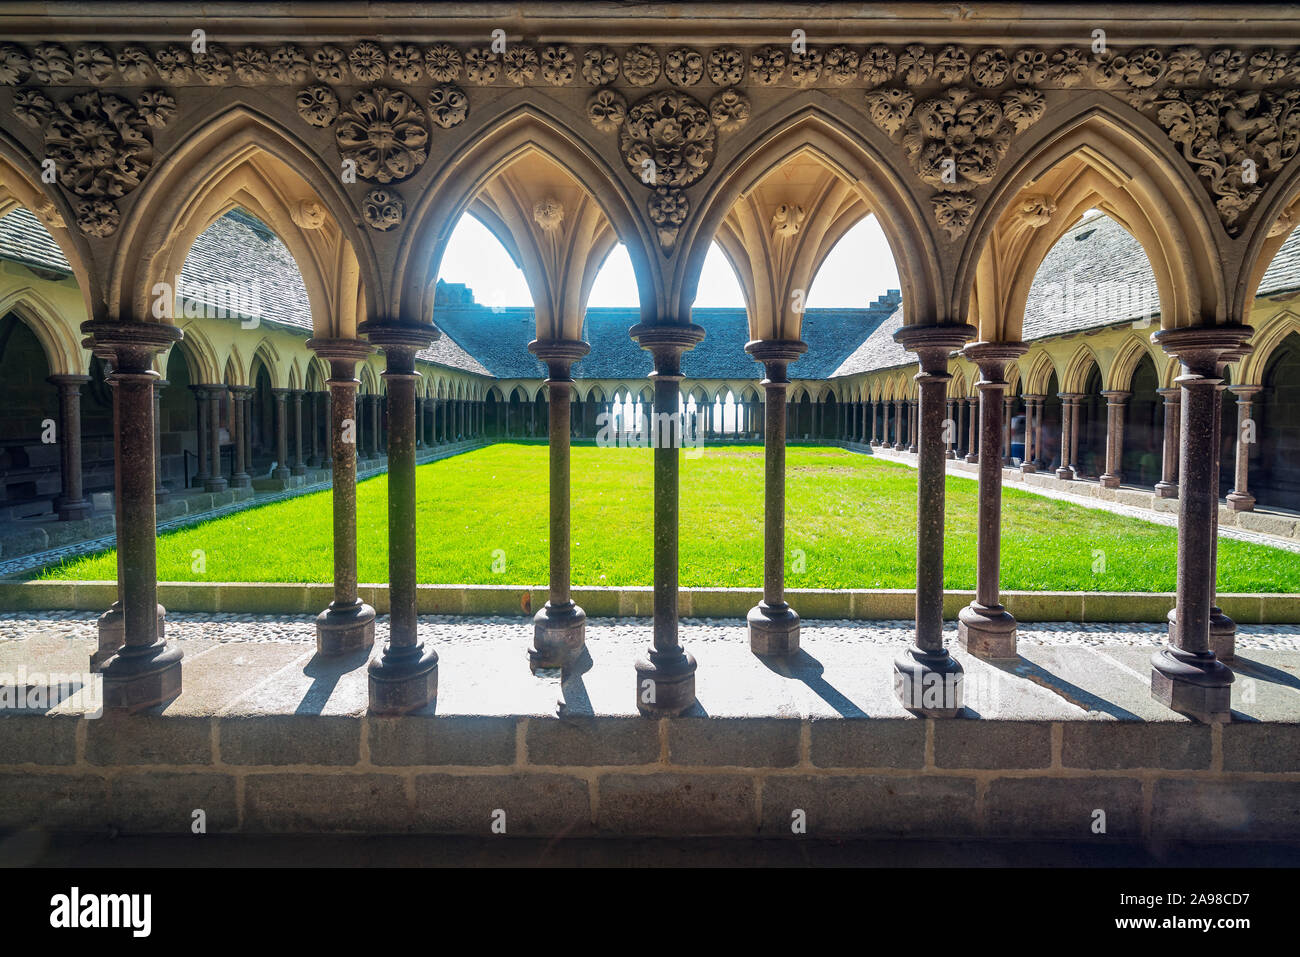 Cloister of the abbey of Mont Saint Michael formed by a succession of columns and arches. Stock Photo